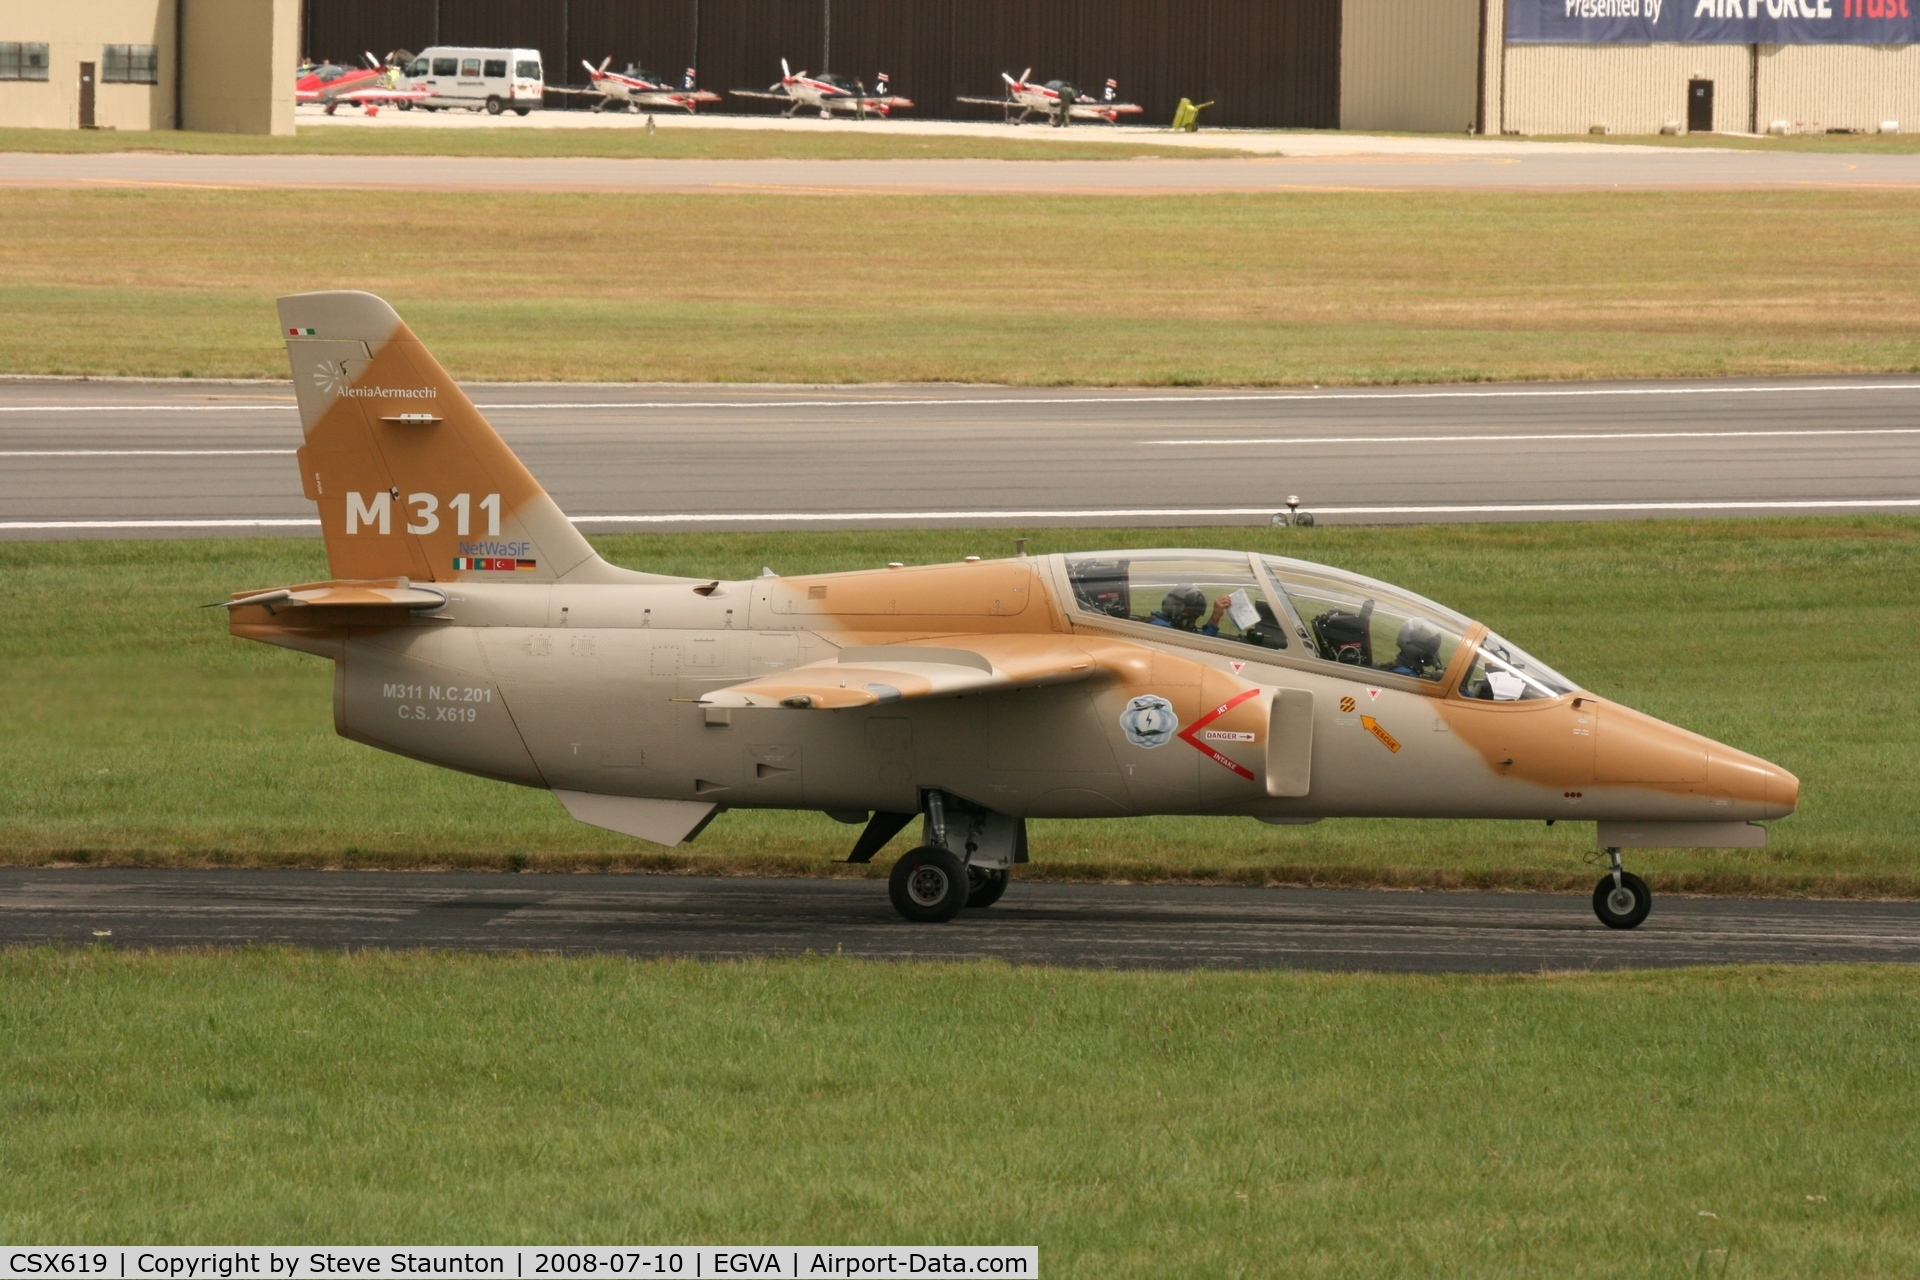 CSX619, Aermacchi M-311 C/N 201, Taken at the Royal International Air Tattoo 2008 during arrivals and departures (show days cancelled due to bad weather)